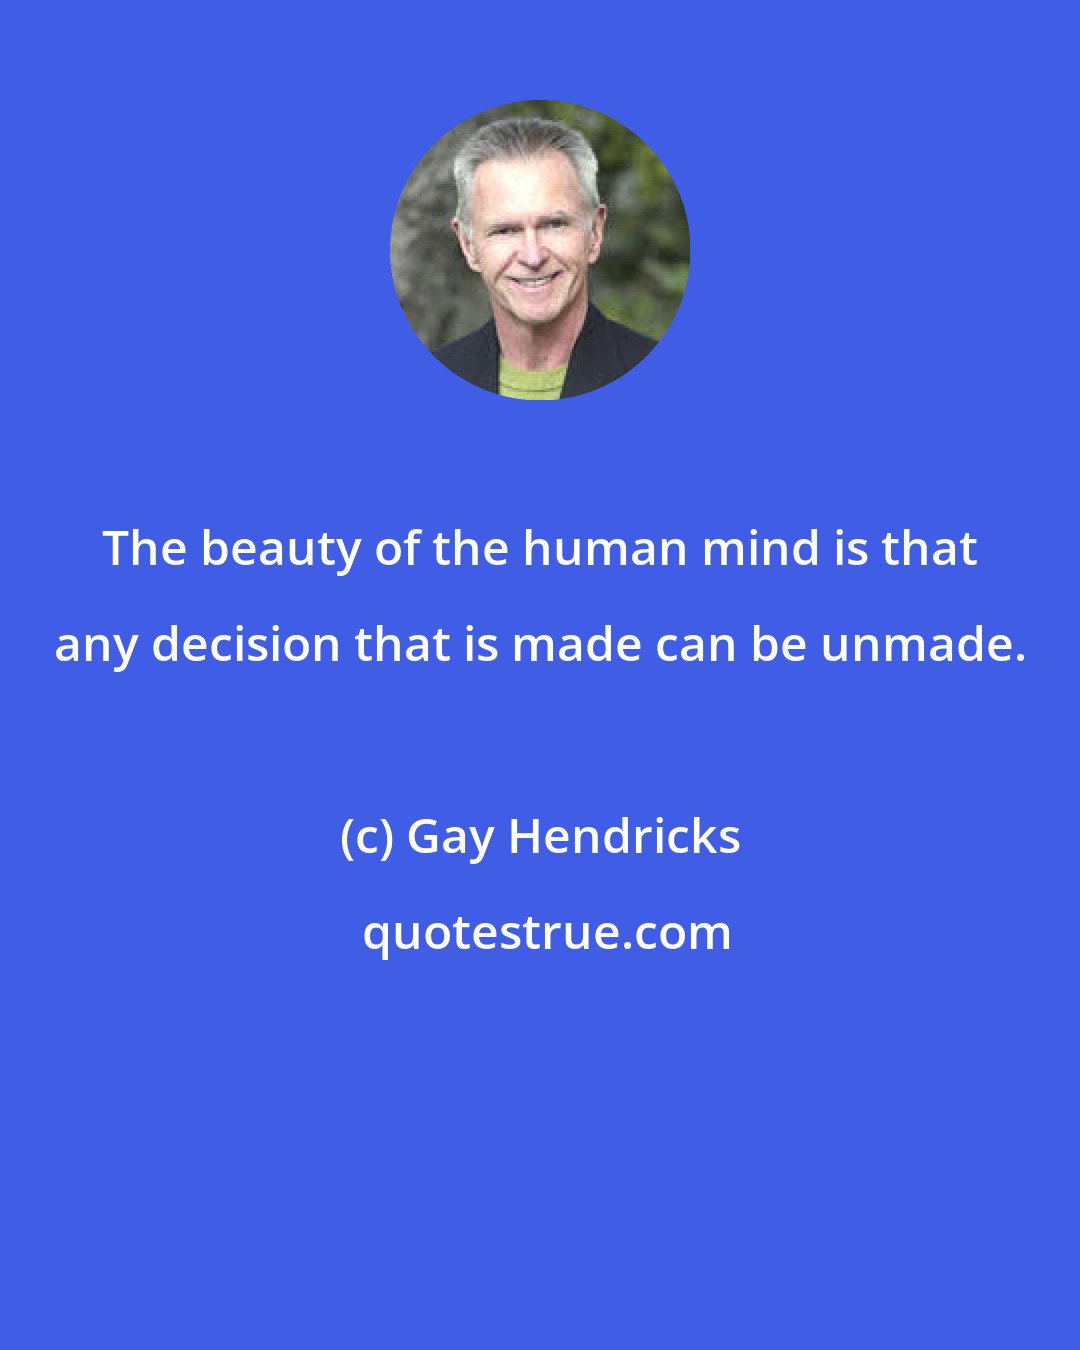 Gay Hendricks: The beauty of the human mind is that any decision that is made can be unmade.